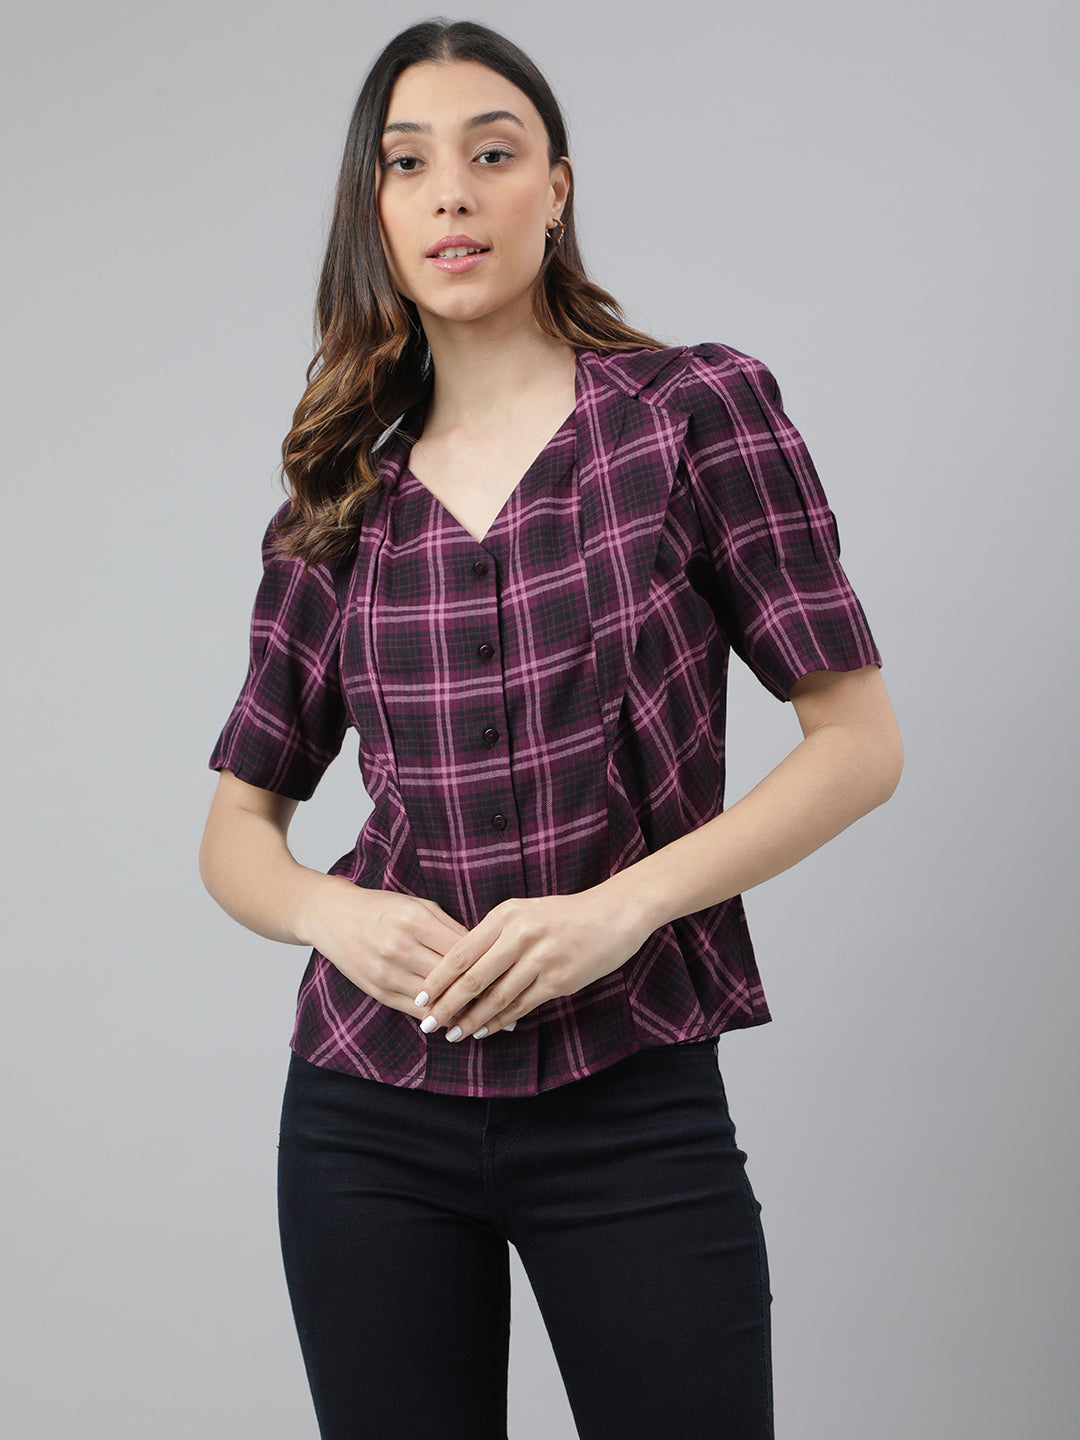 Wine Half Sleeve V-Neck Check Shirt Women Blouse Top for Casual